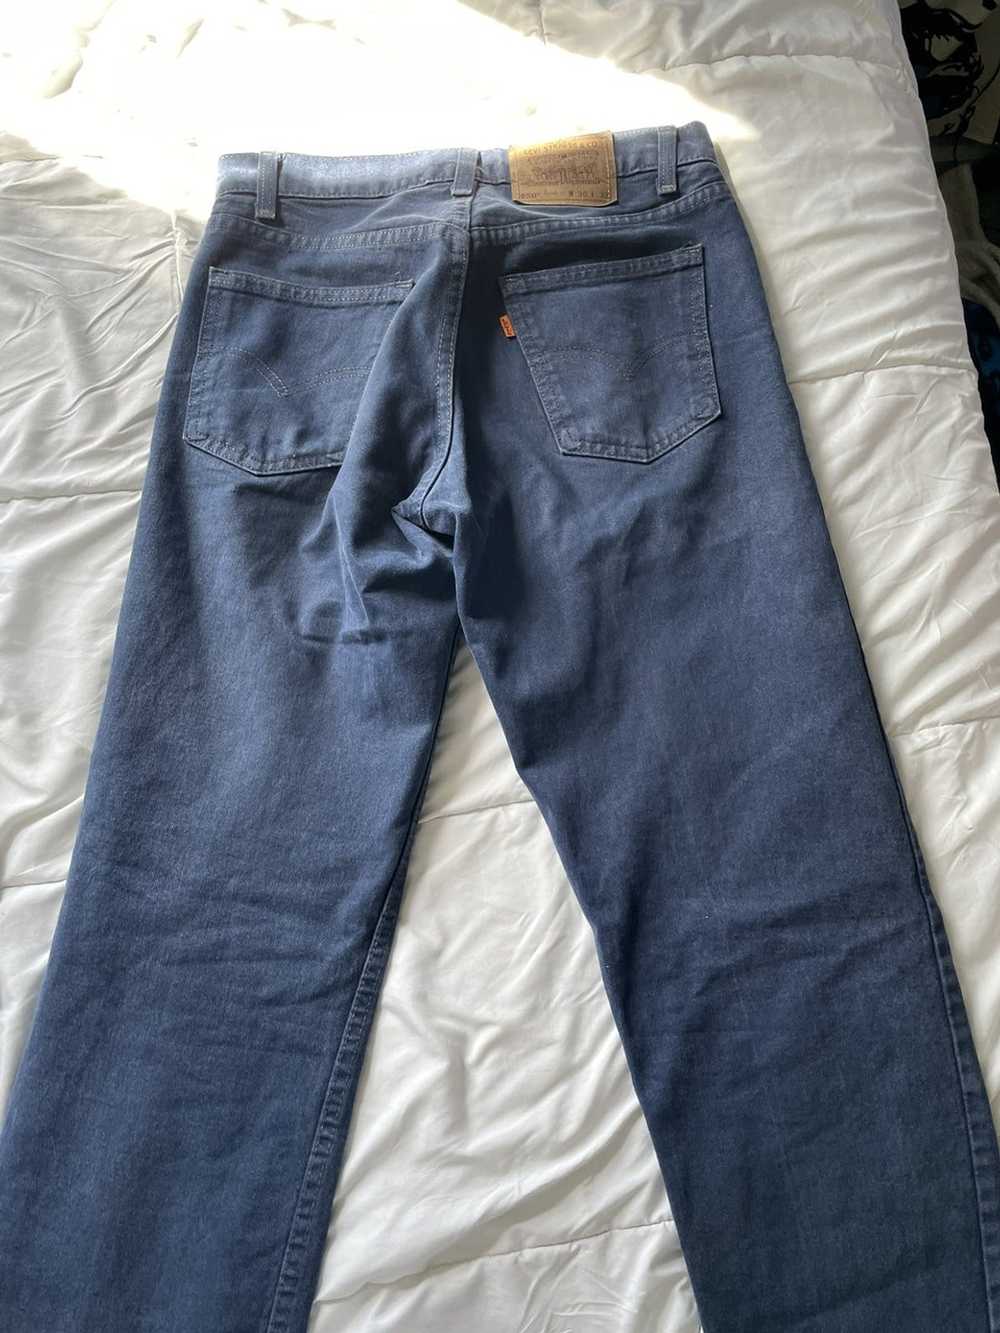 Levi's Vintage 550 relaxed fit jean - image 2